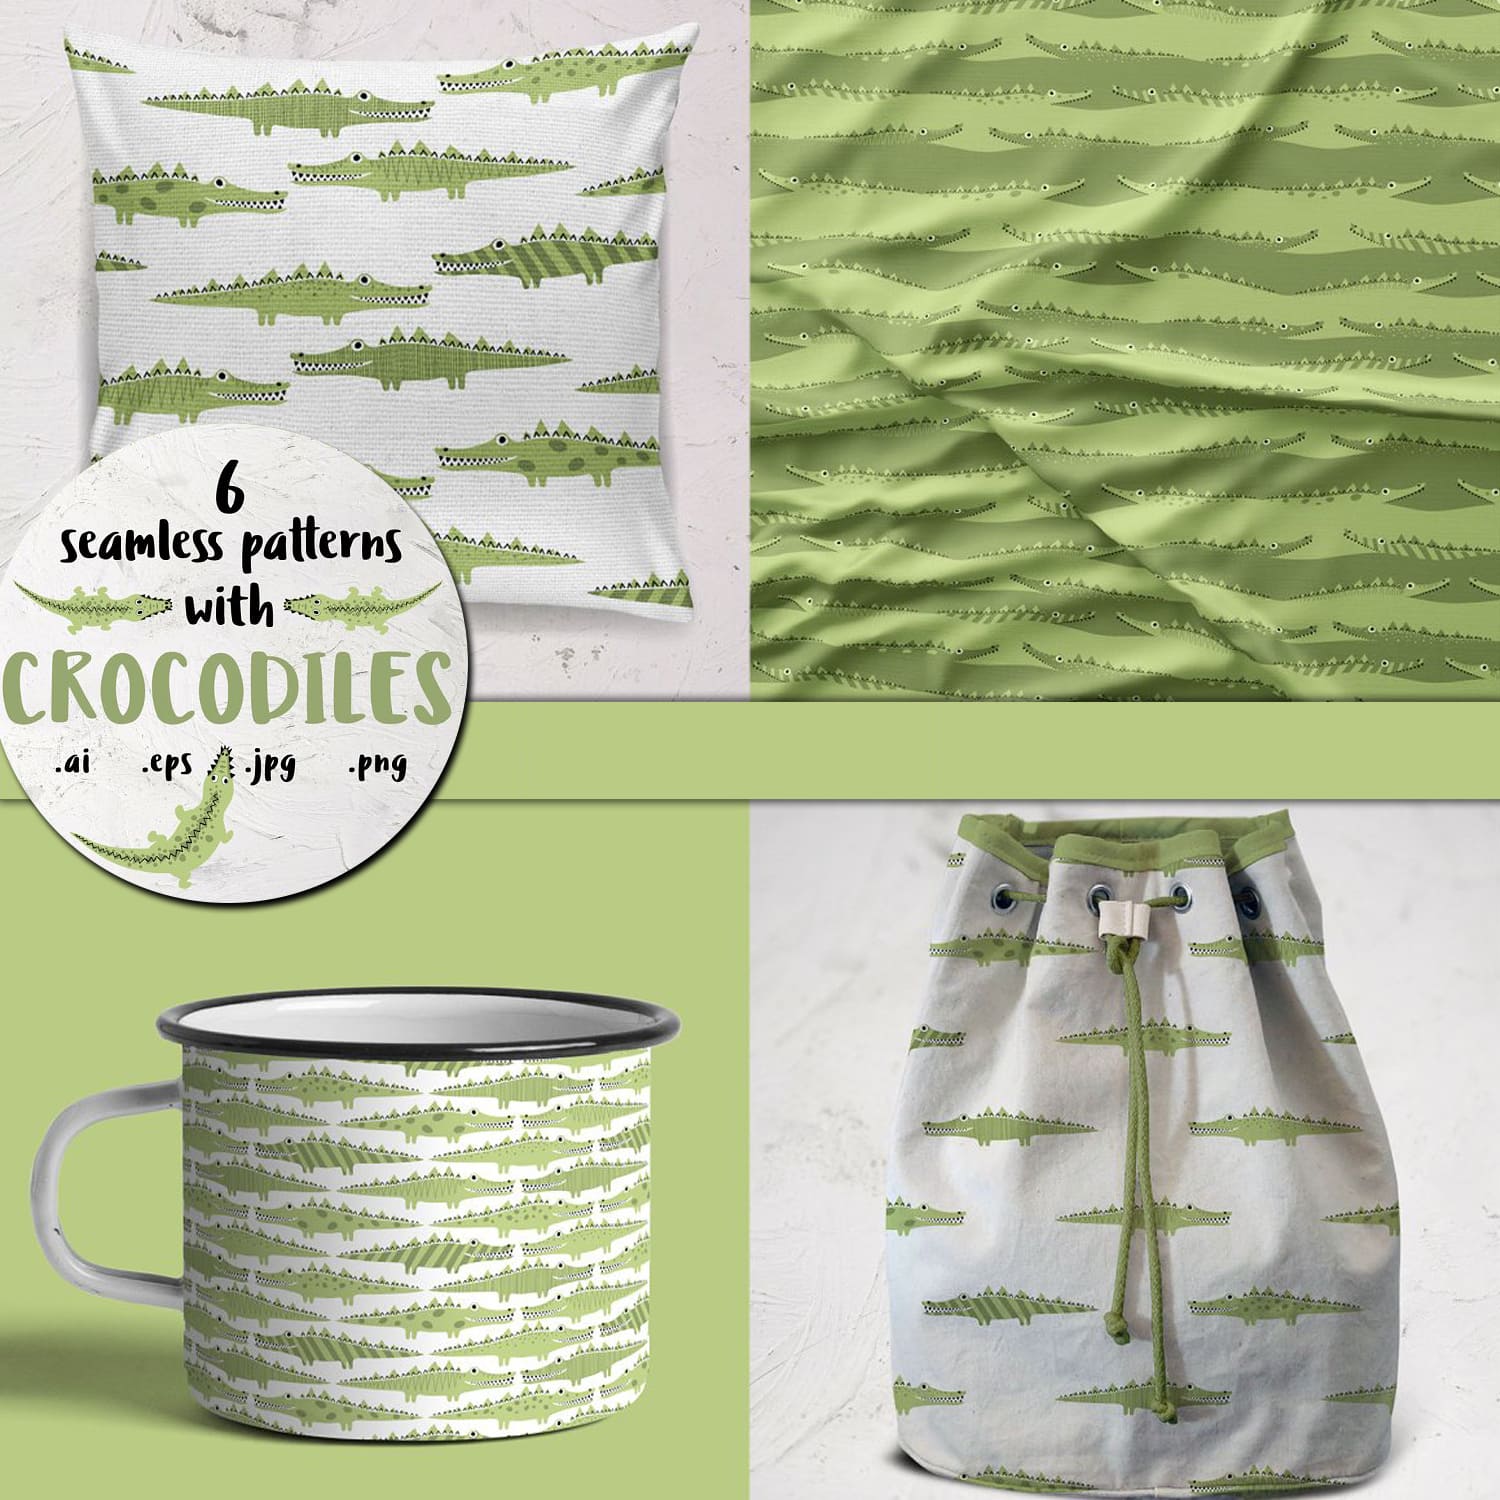 Patterns with CROCODILES cover.